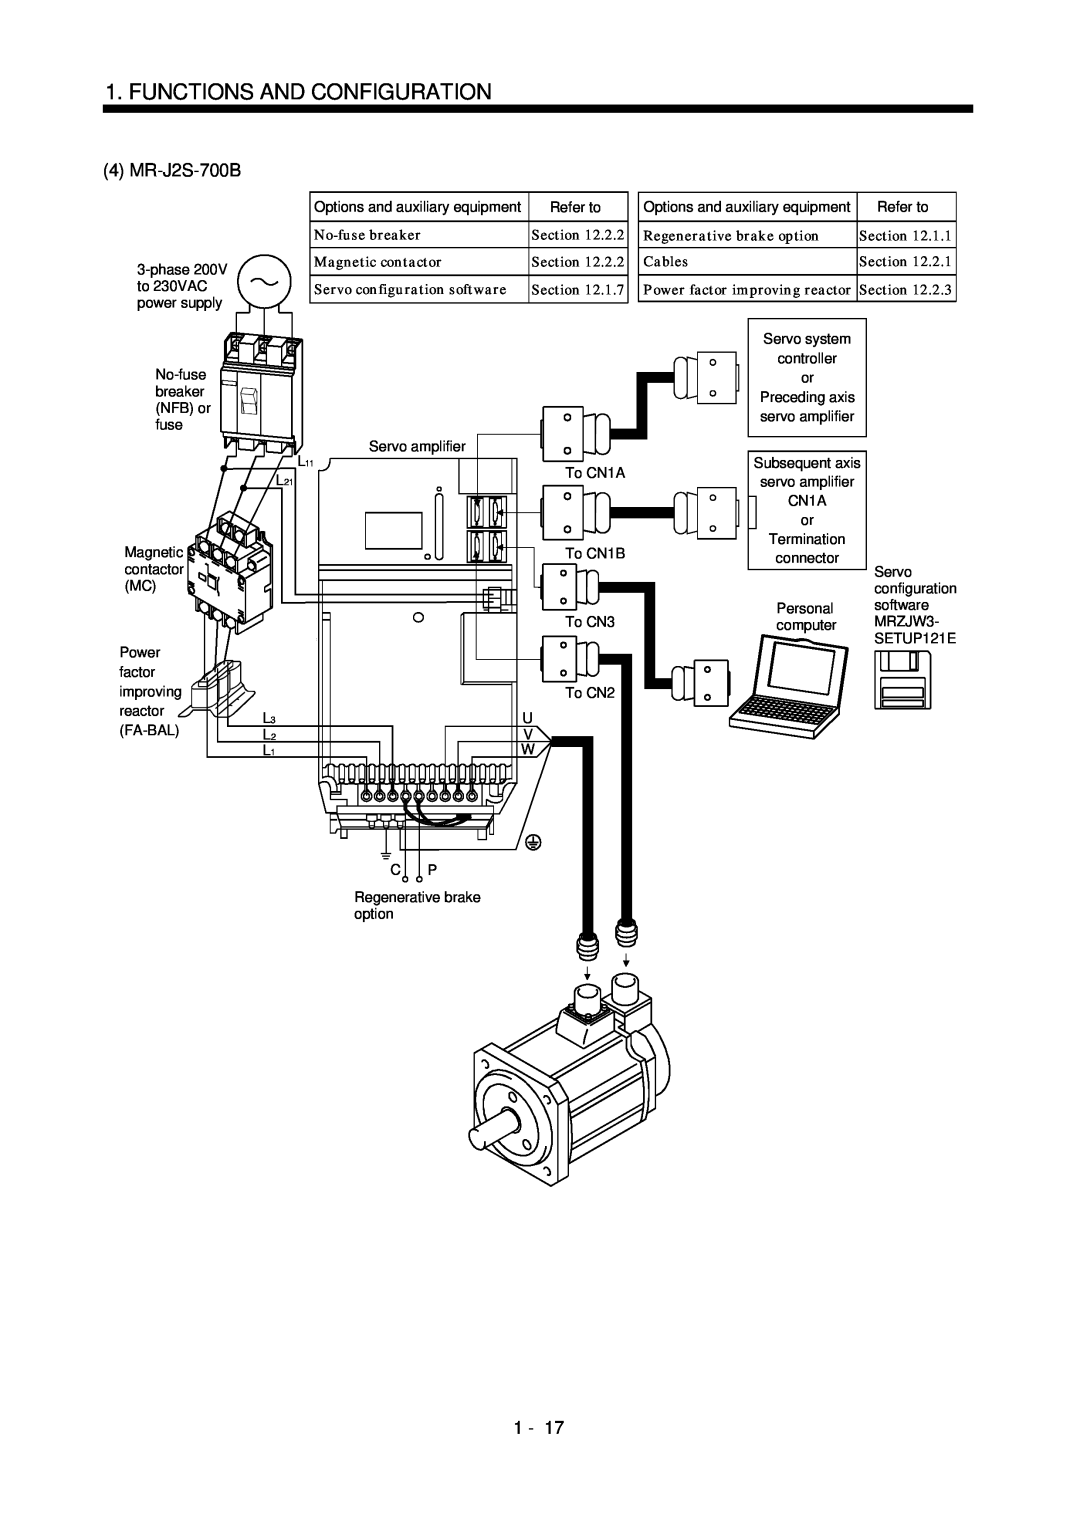 Bose MR-J2S- B instruction manual Functions And Configuration, MR-J2S-700B, phase200V to 230VAC power supply 